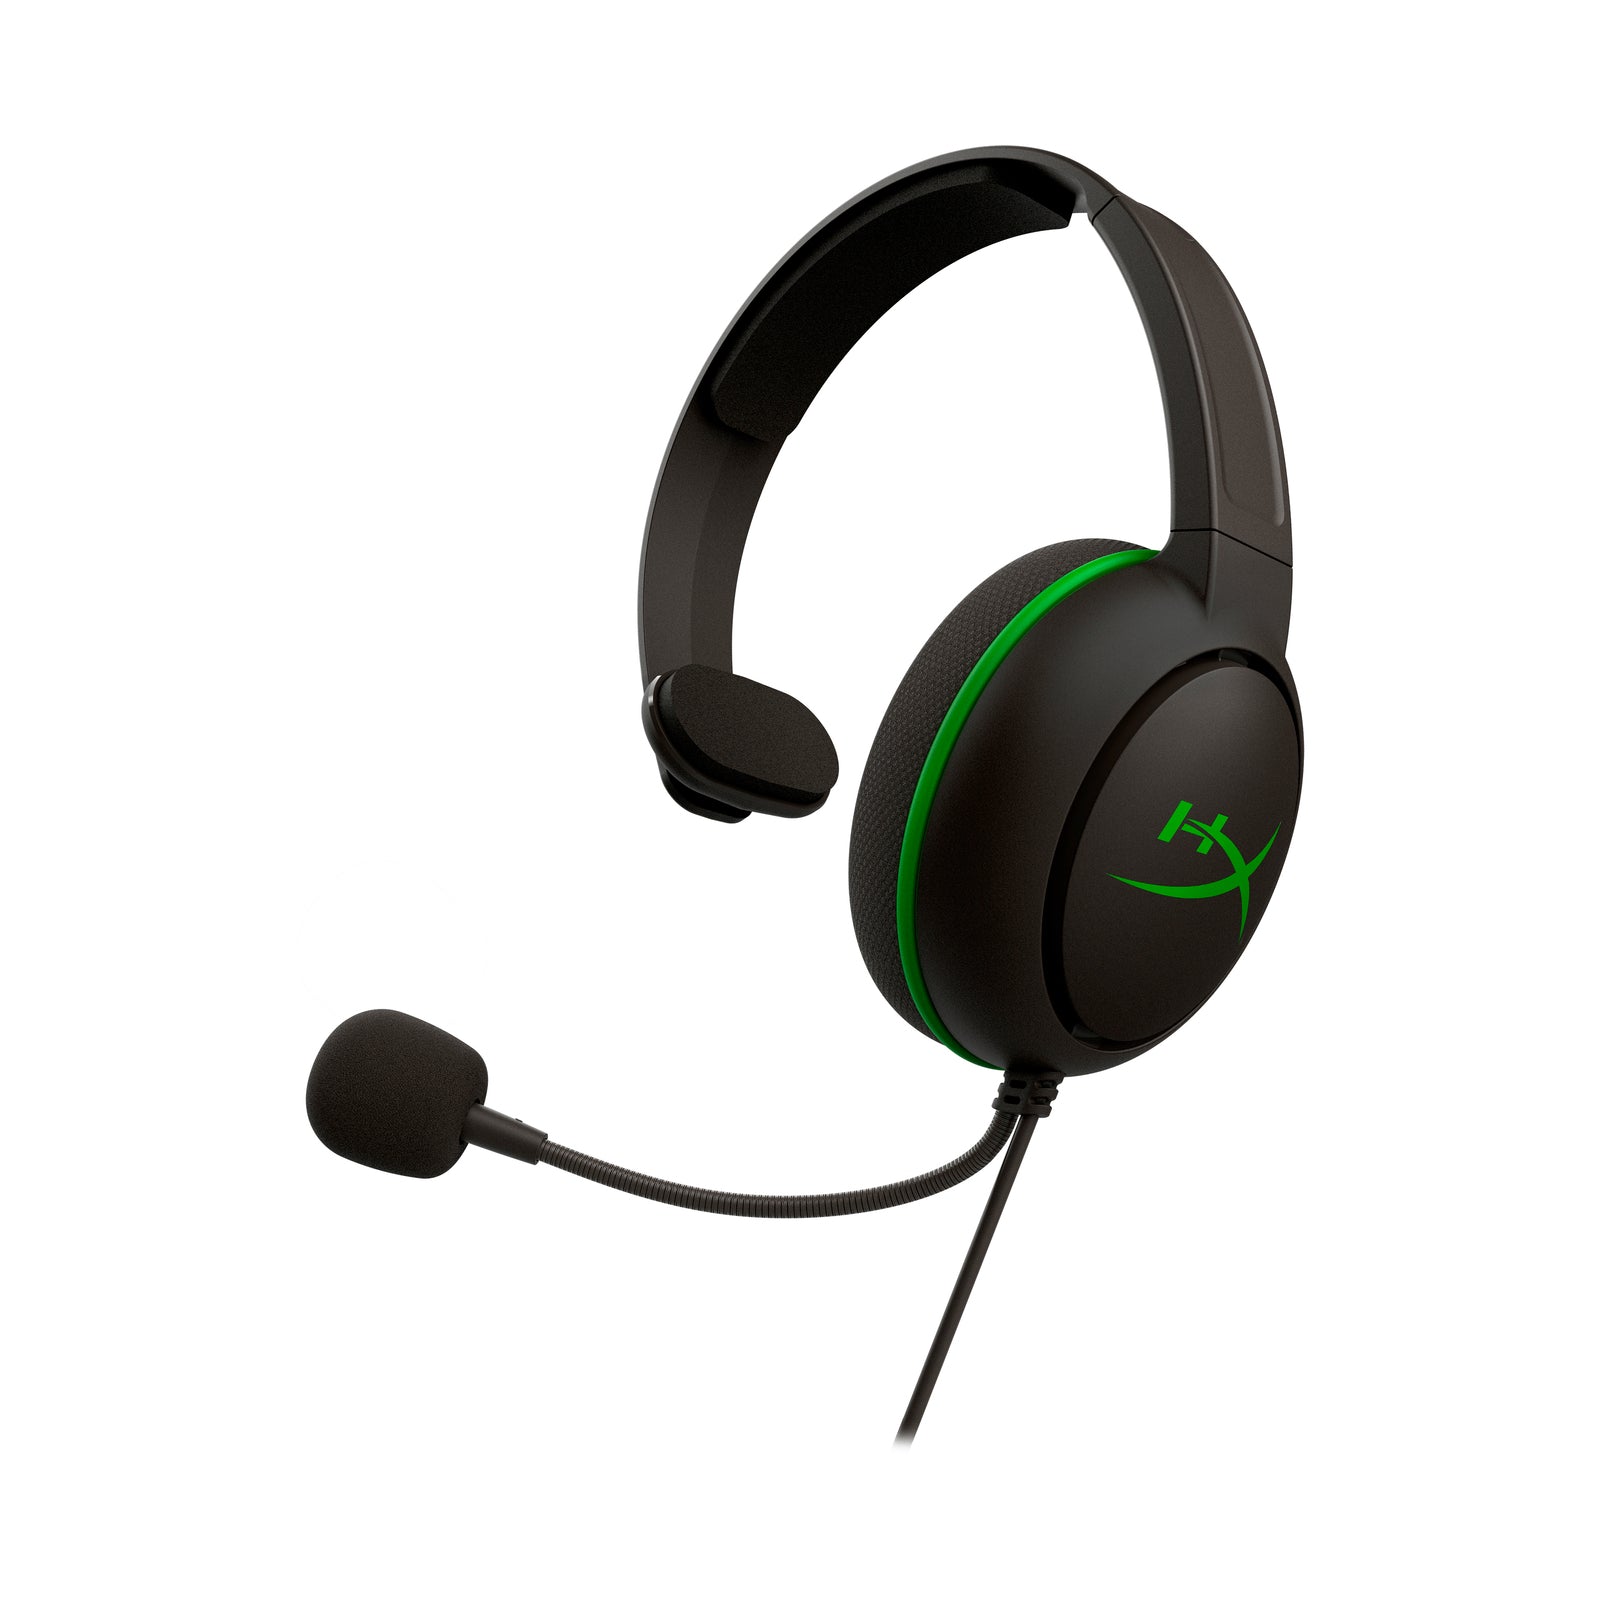 CloudX Chat Headset for Xbox – One Ear Cup, Reversible Design